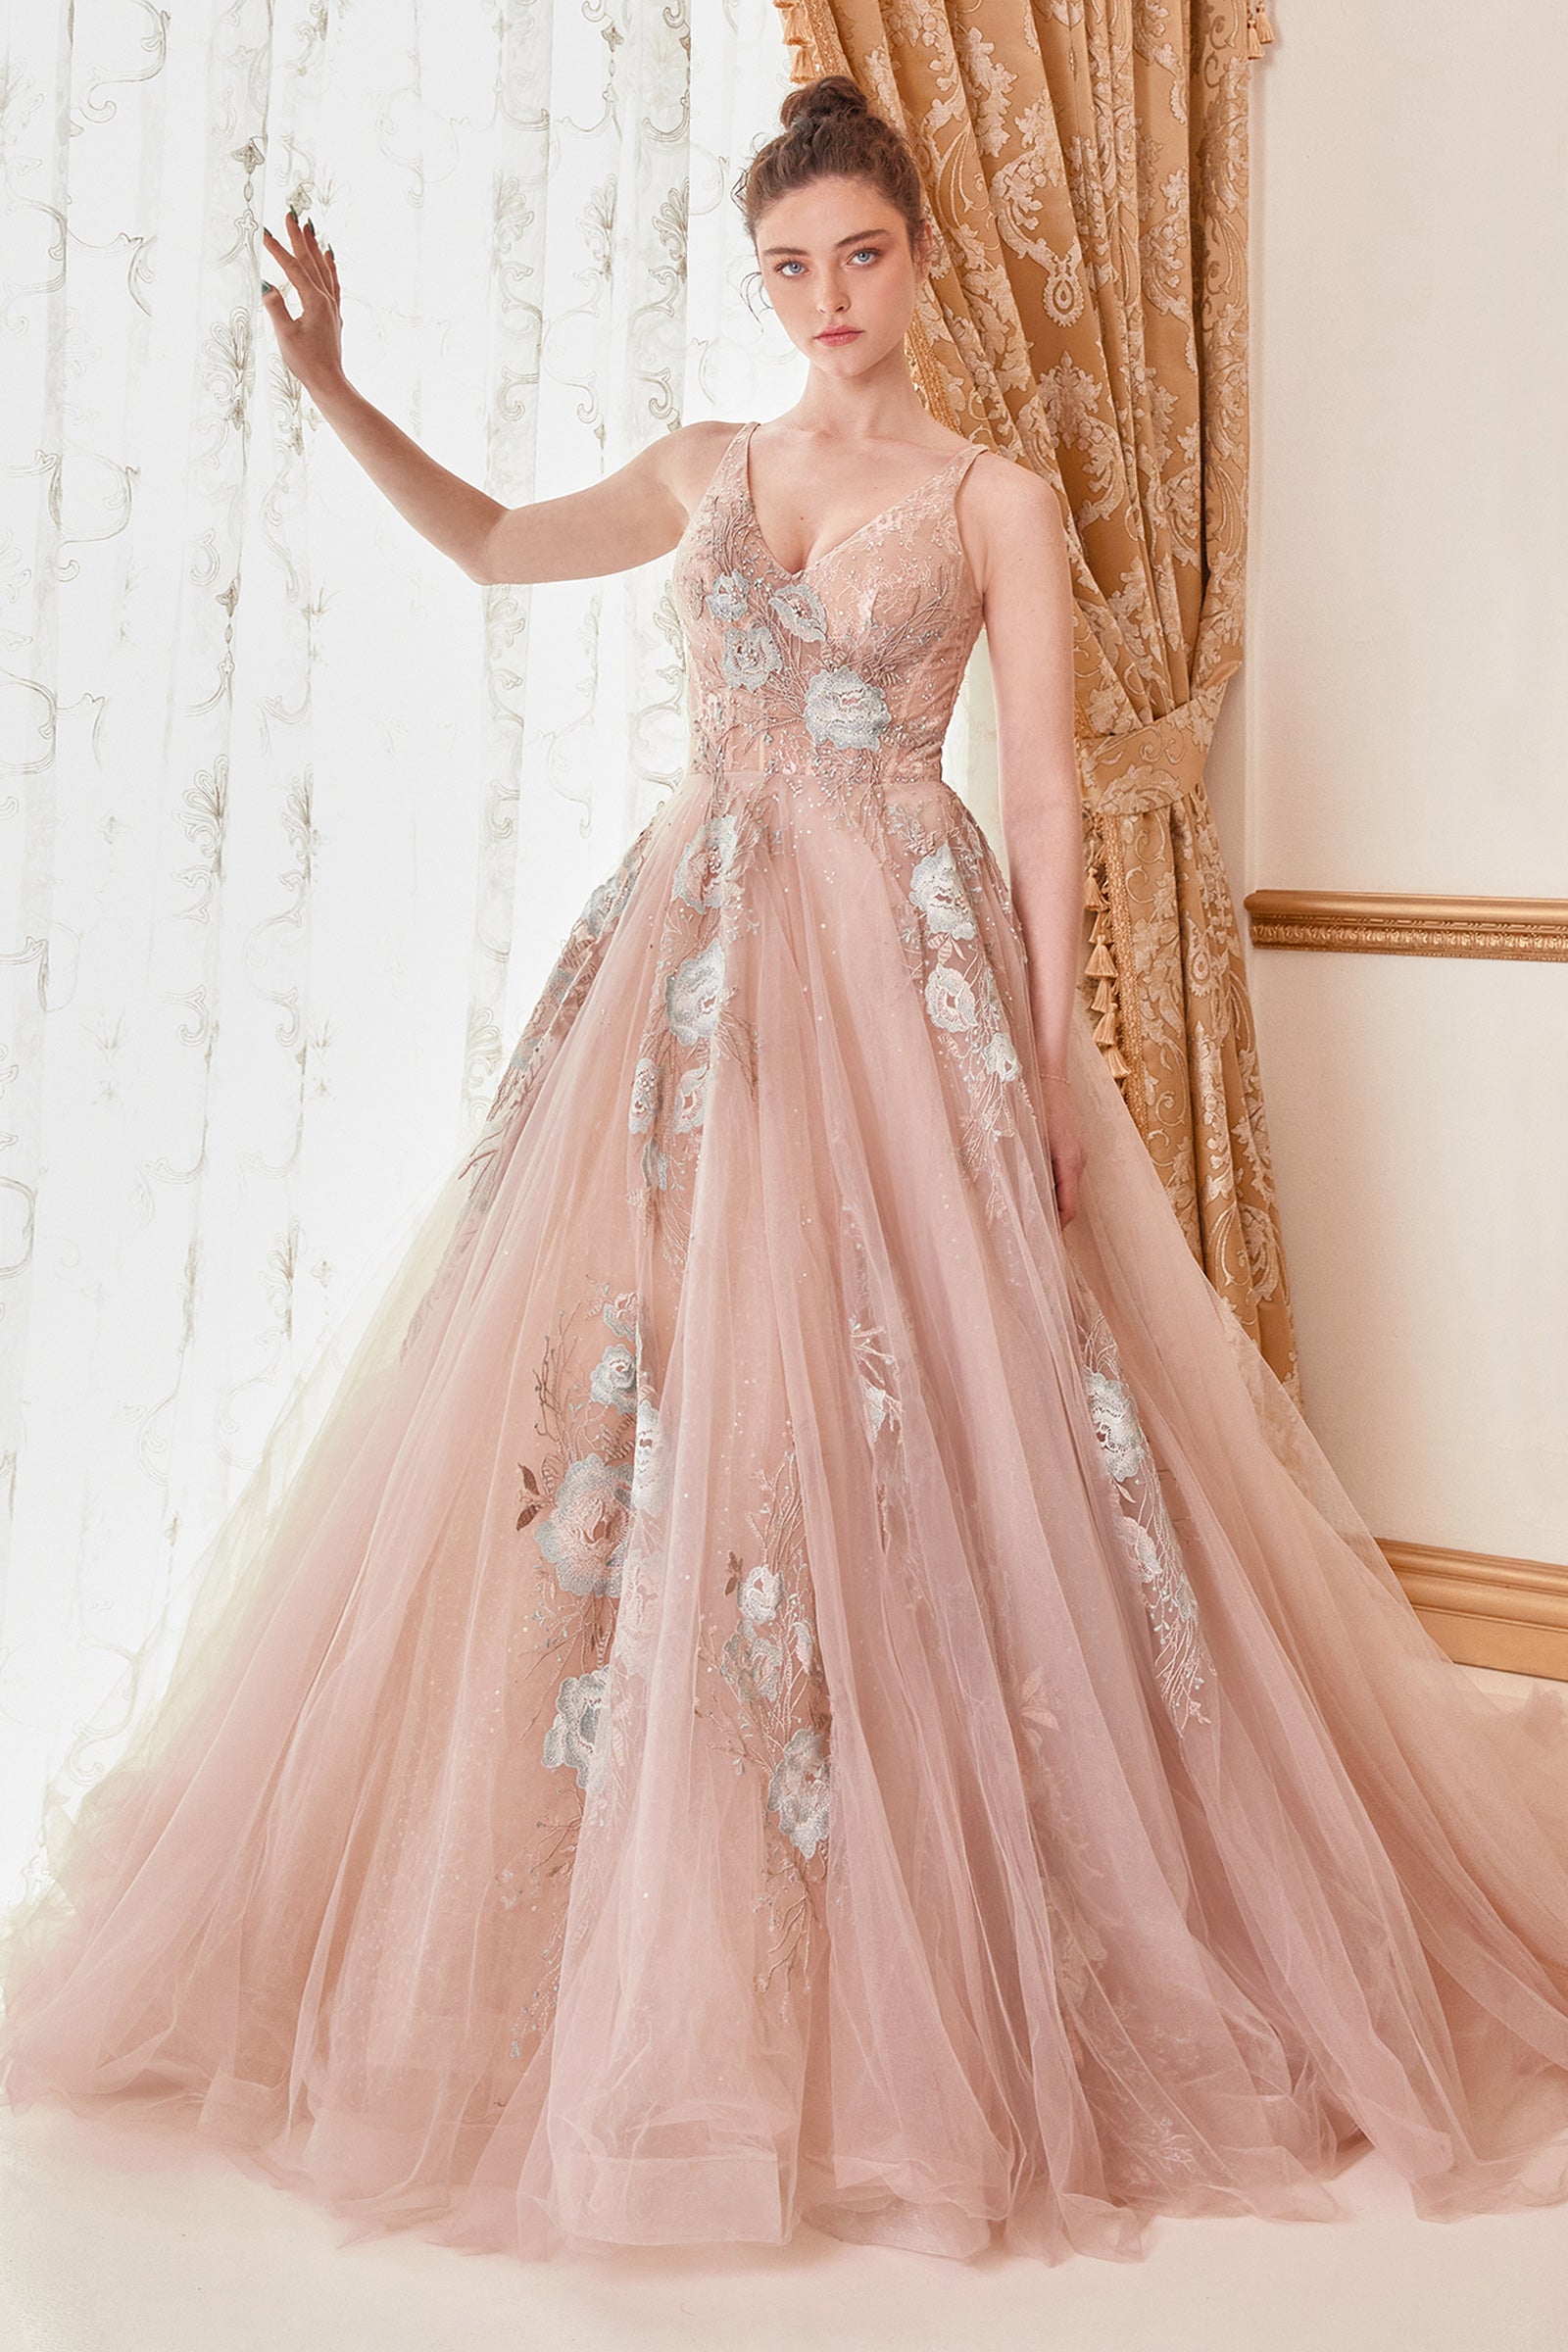 Nox Anabel CU1192 Long Quinceanera Dress Strapless Ball Gown for $389.99 –  The Dress Outlet